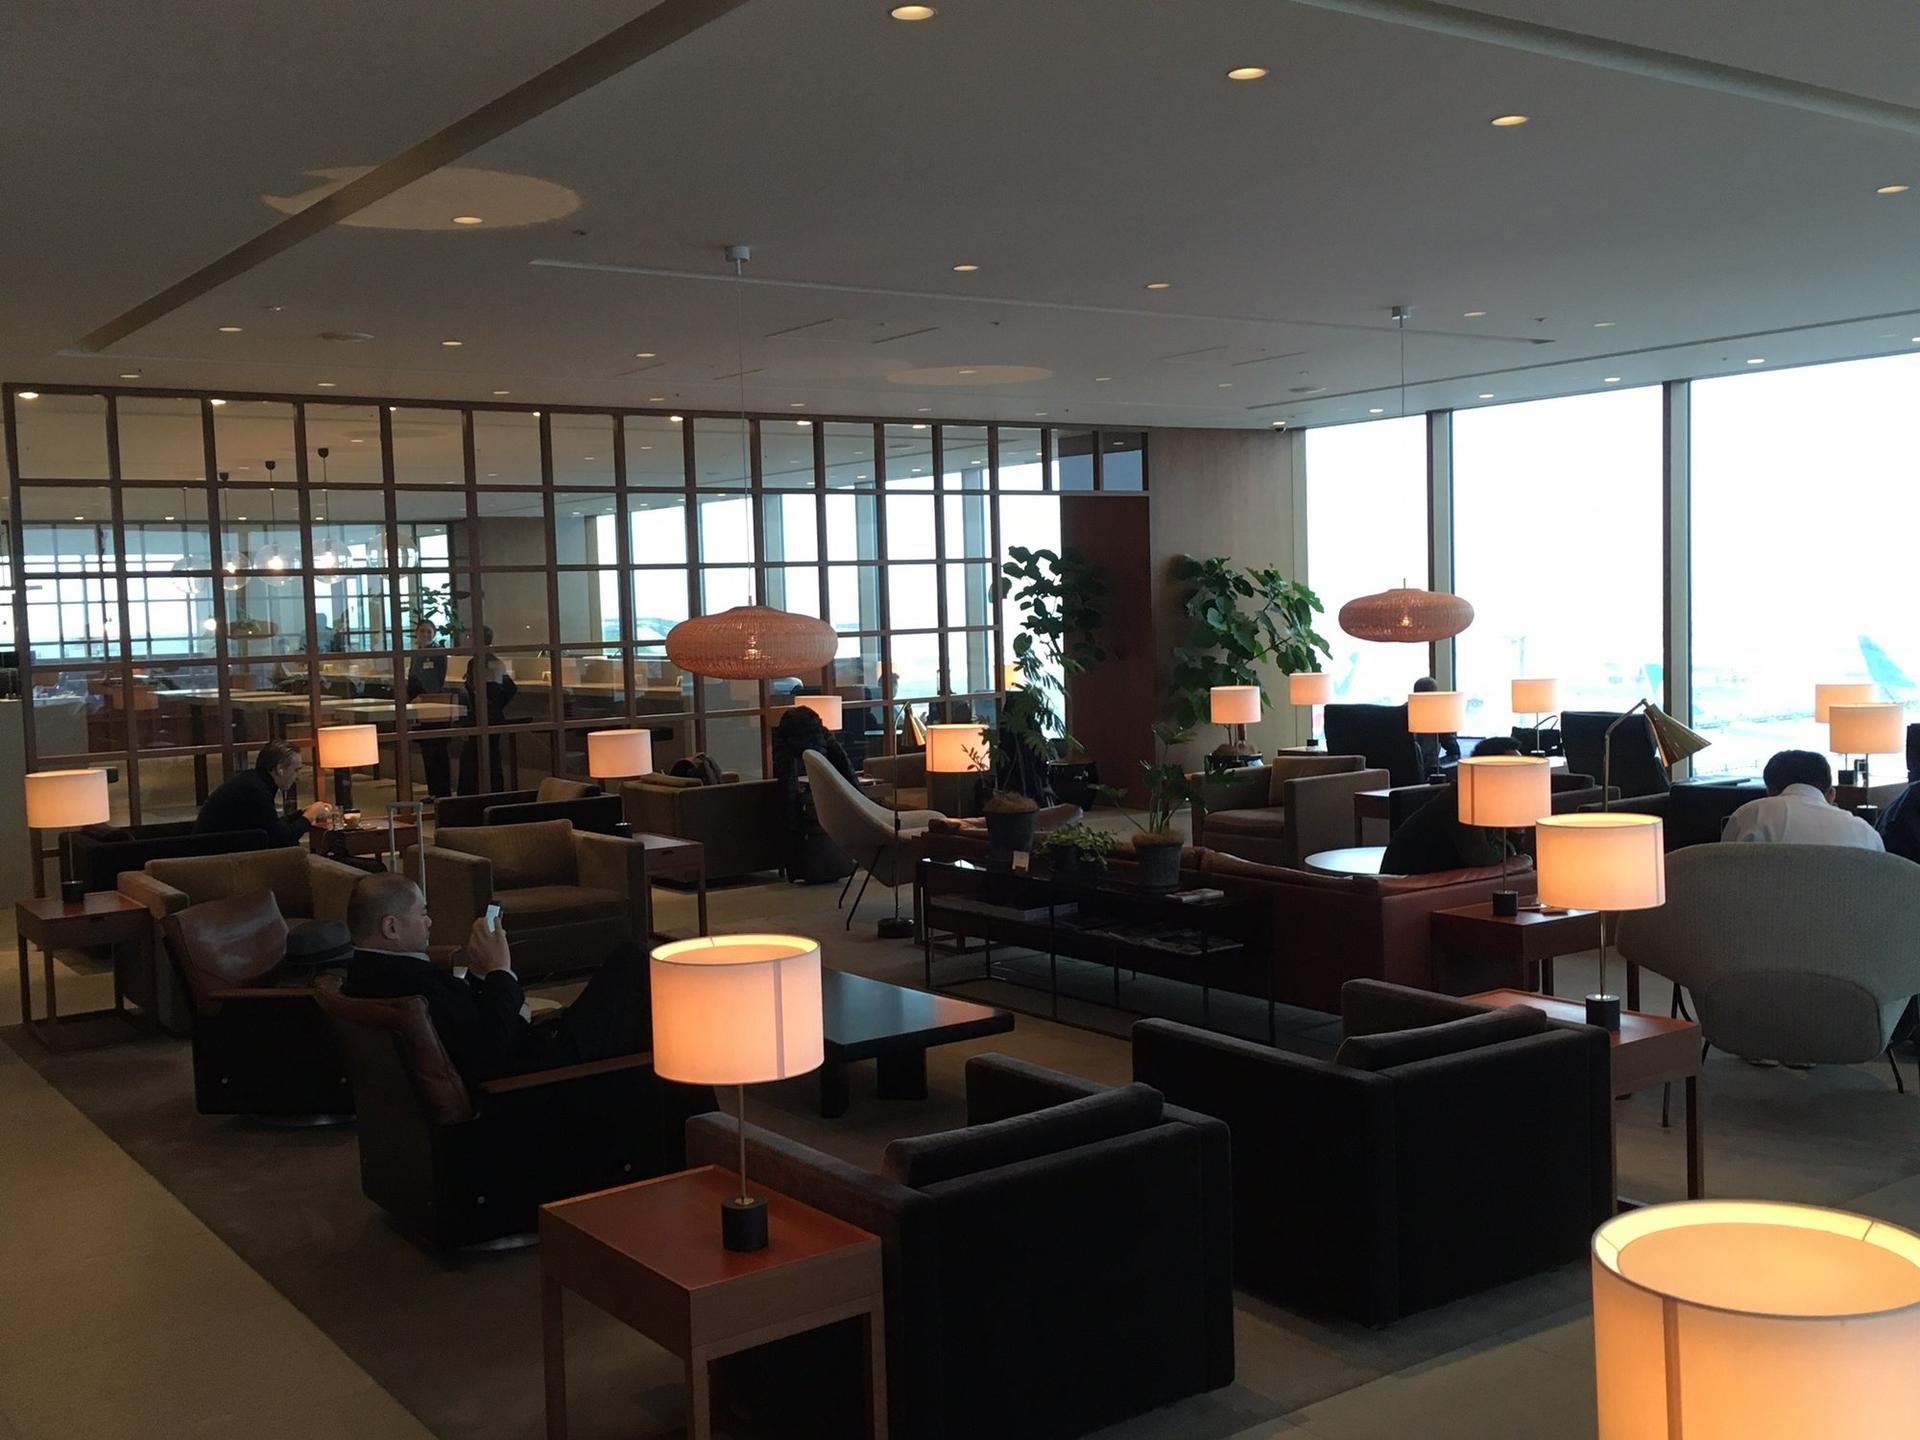 Cathay Pacific Lounge image 46 of 49